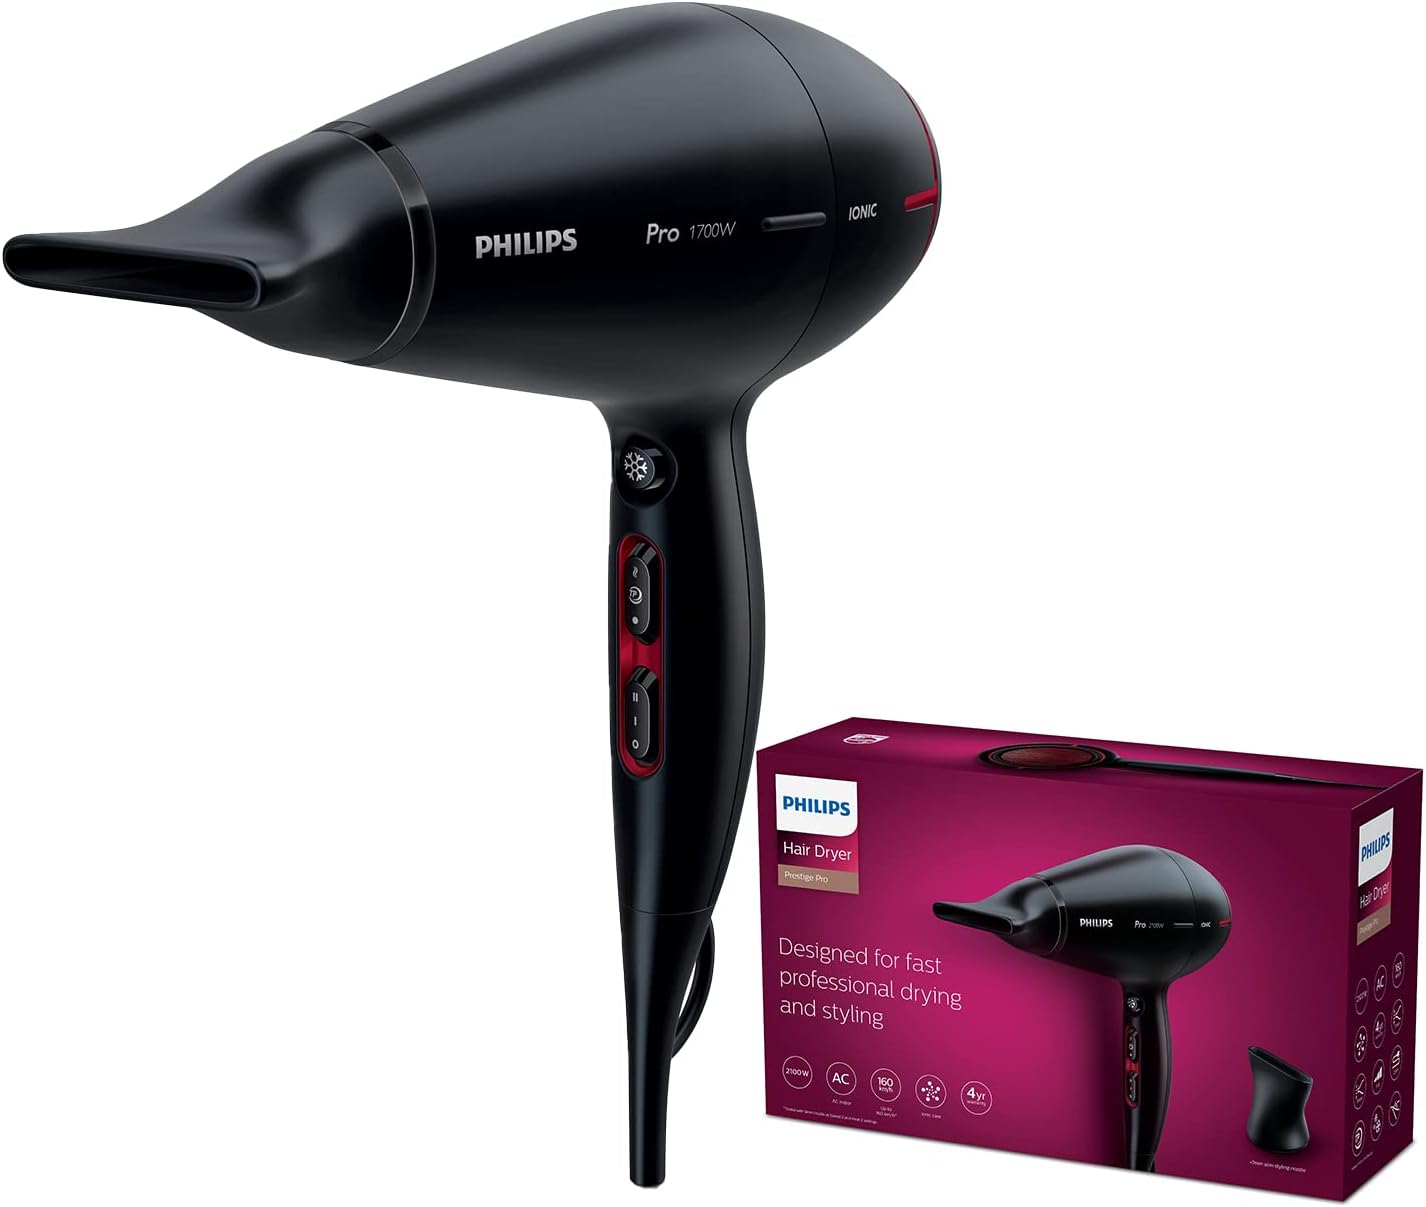 Philips Pro Hair Dryer in Bahrain - Best Personal Care Accessories